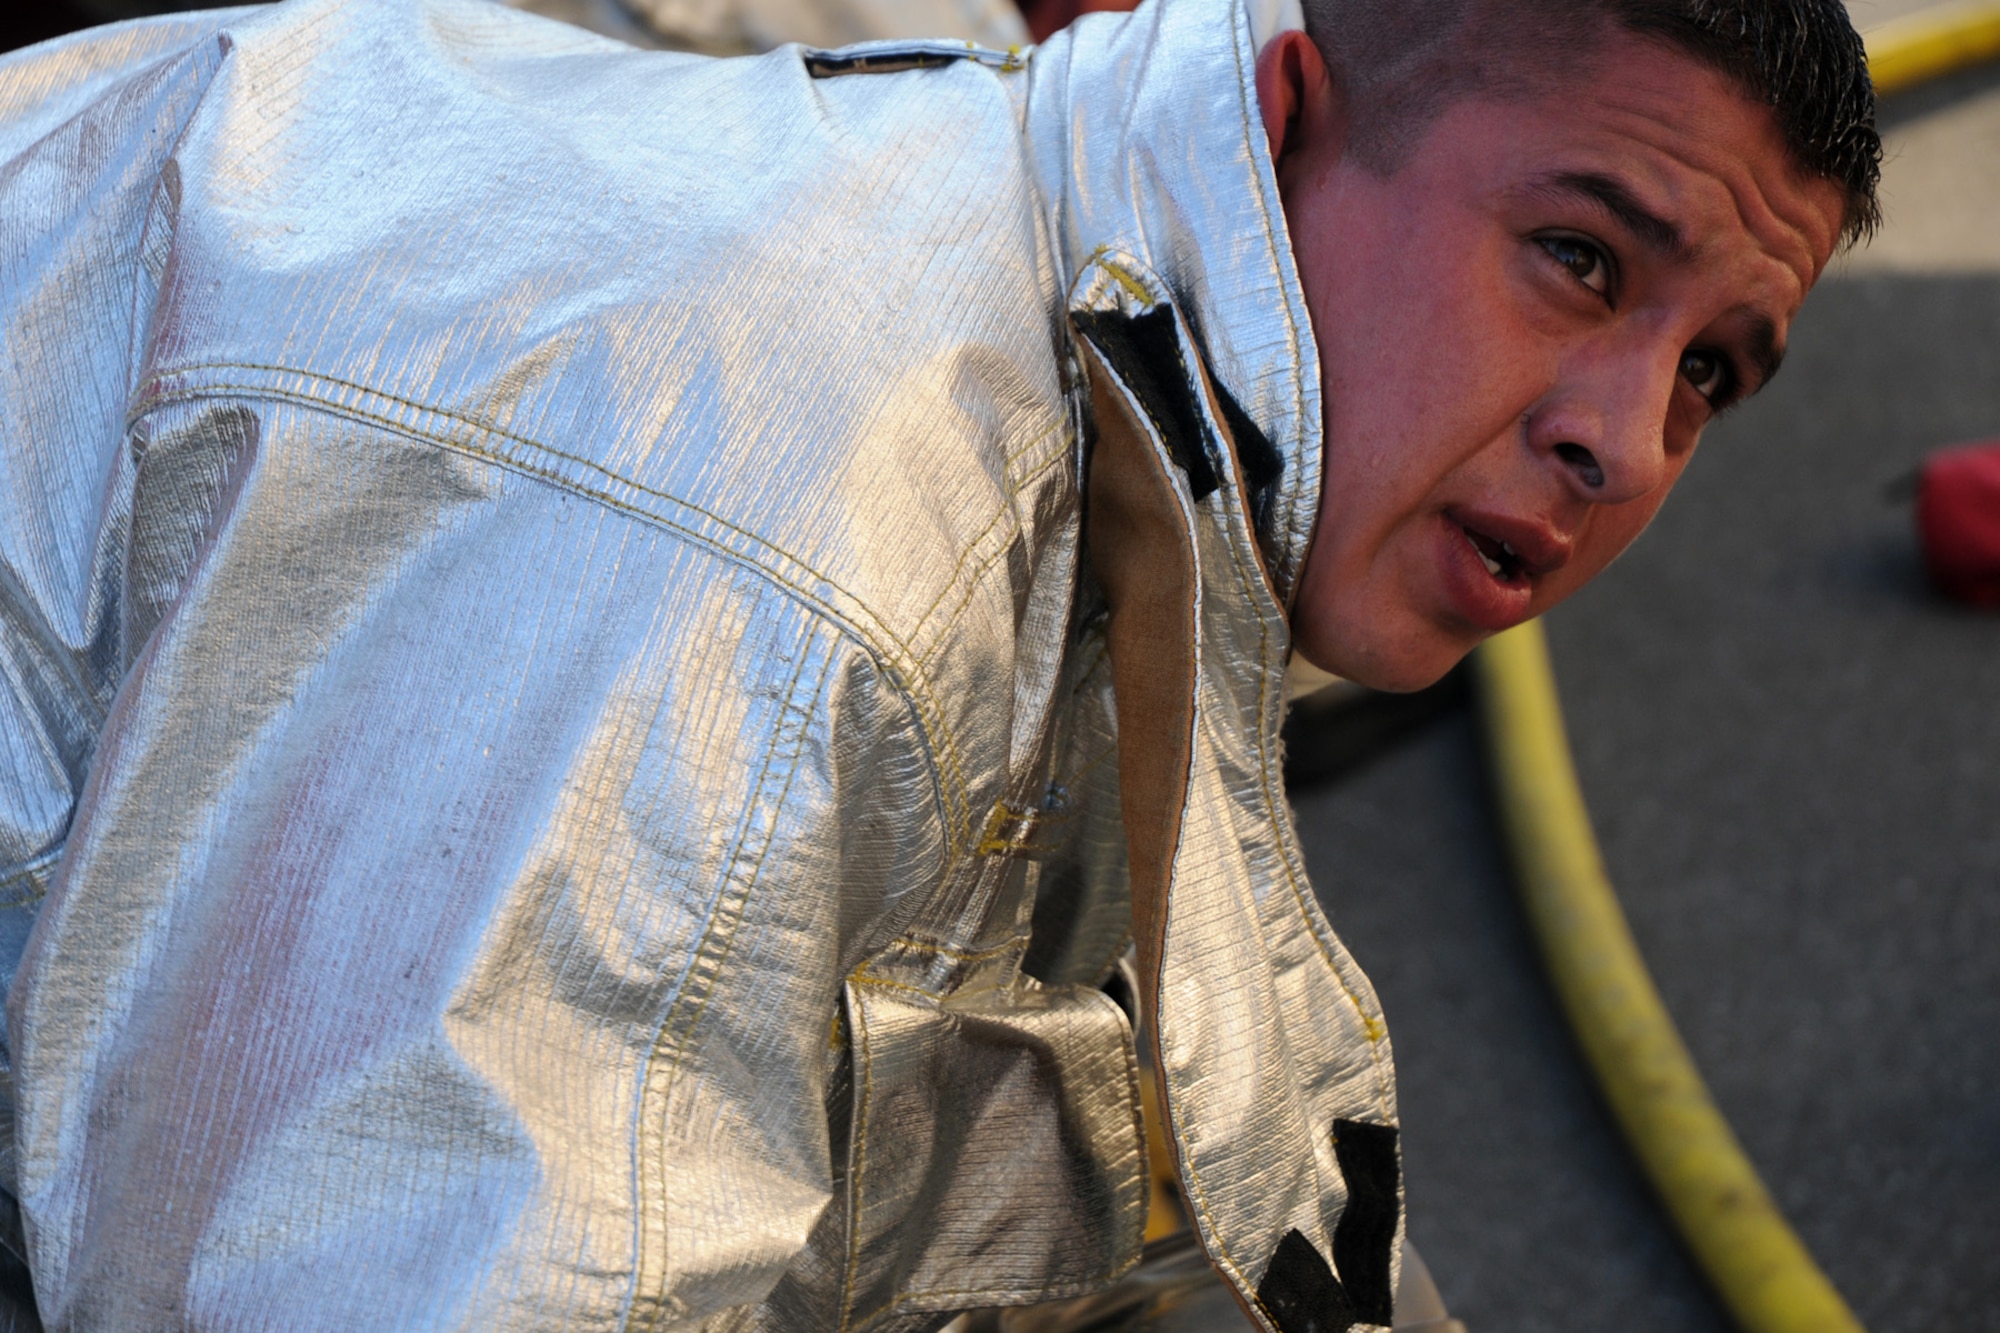 Staff Sgt. John Garcia, 18th Civil Engineering Squadron Fire Department, takes a breather after completing a simulated scenario involving a kitchen fire and saving two victims at the Silver Flag Training Facility Dec. 2 at Kadena Air Base. The 18th Wing is participating in a Local Operational Readiness Exercise to test the readiness of Kadena Airmen. (U.S. Air Force photo/Airman 1st Class Amanda Grabiec)